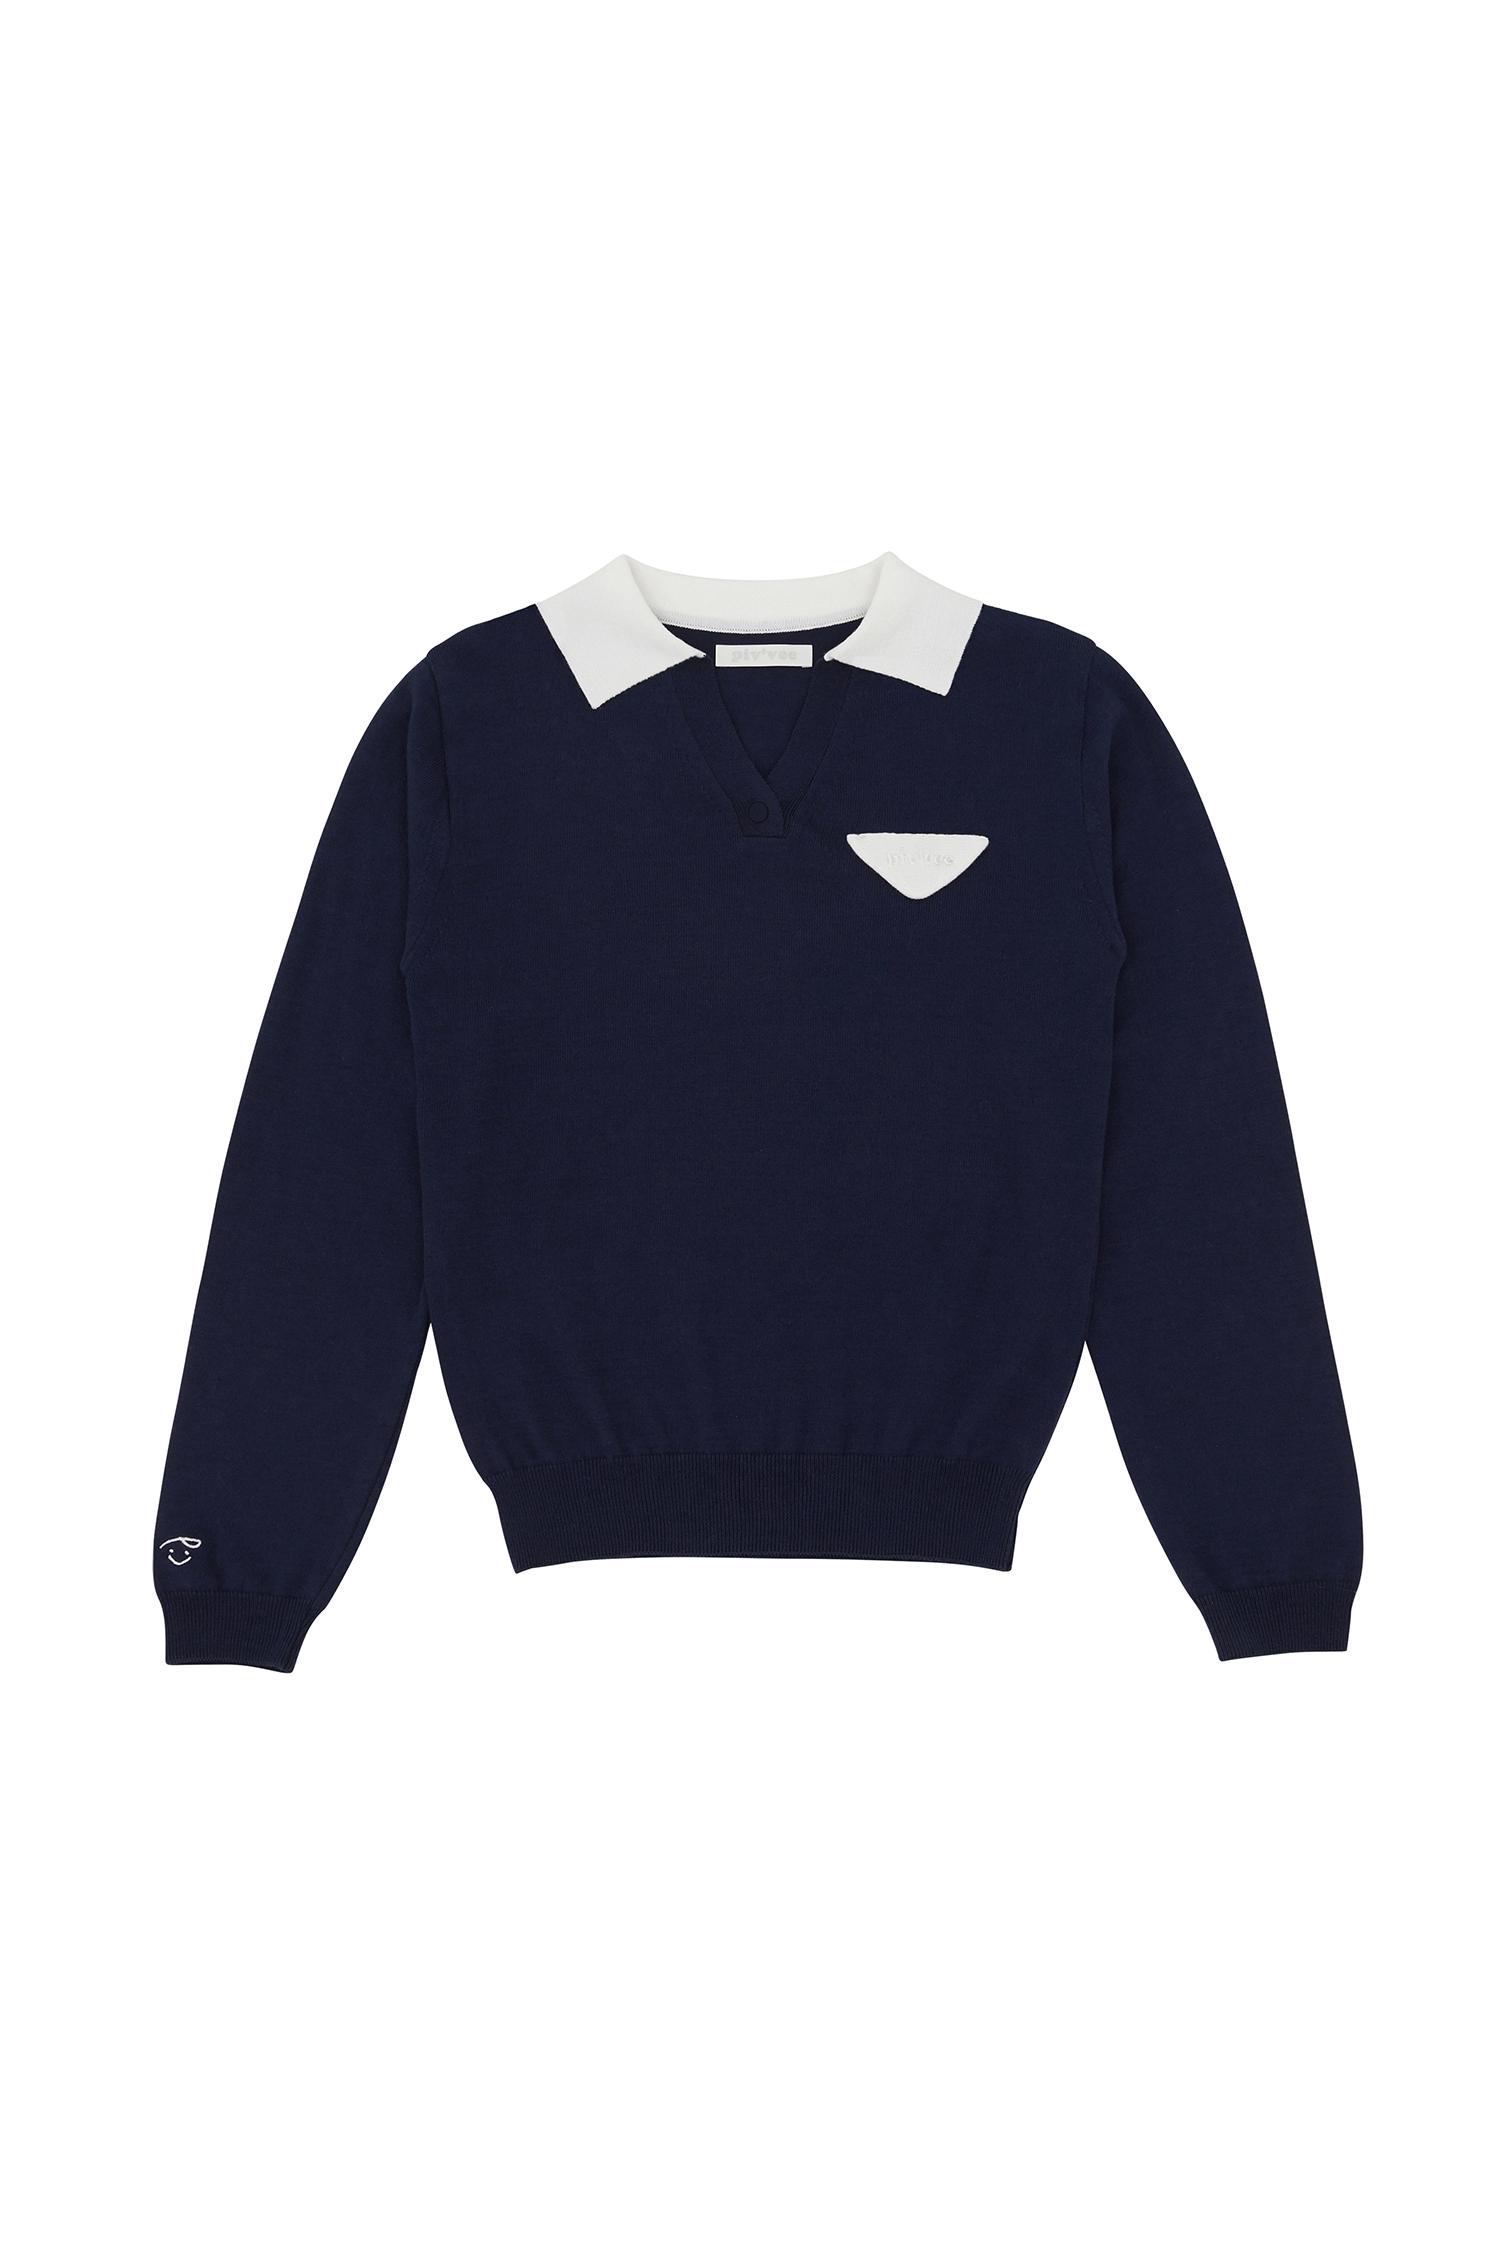 [Reorder] Pointed collar polo knit